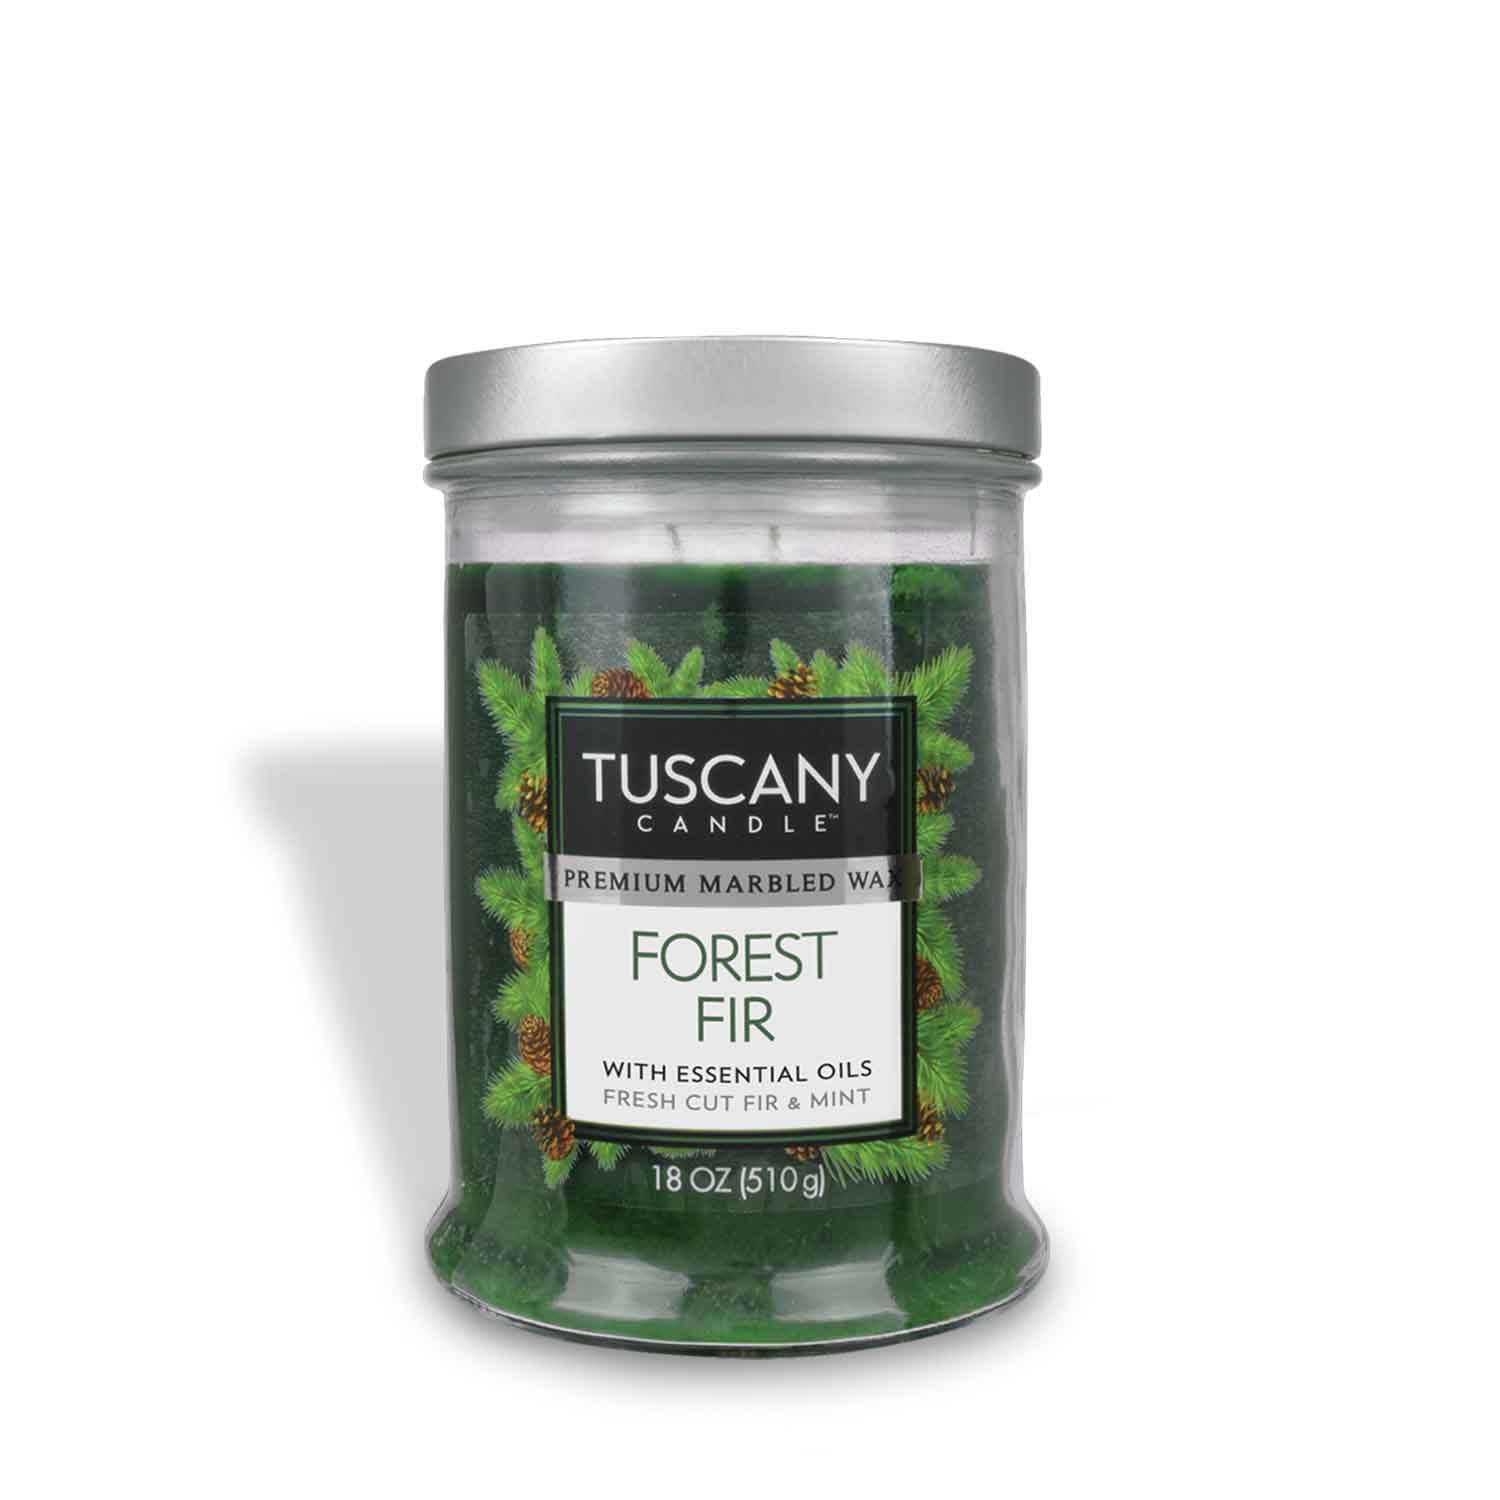 With its pine and mint notes, Forest Fir is one of Tuscany Candle's most popular scented candles